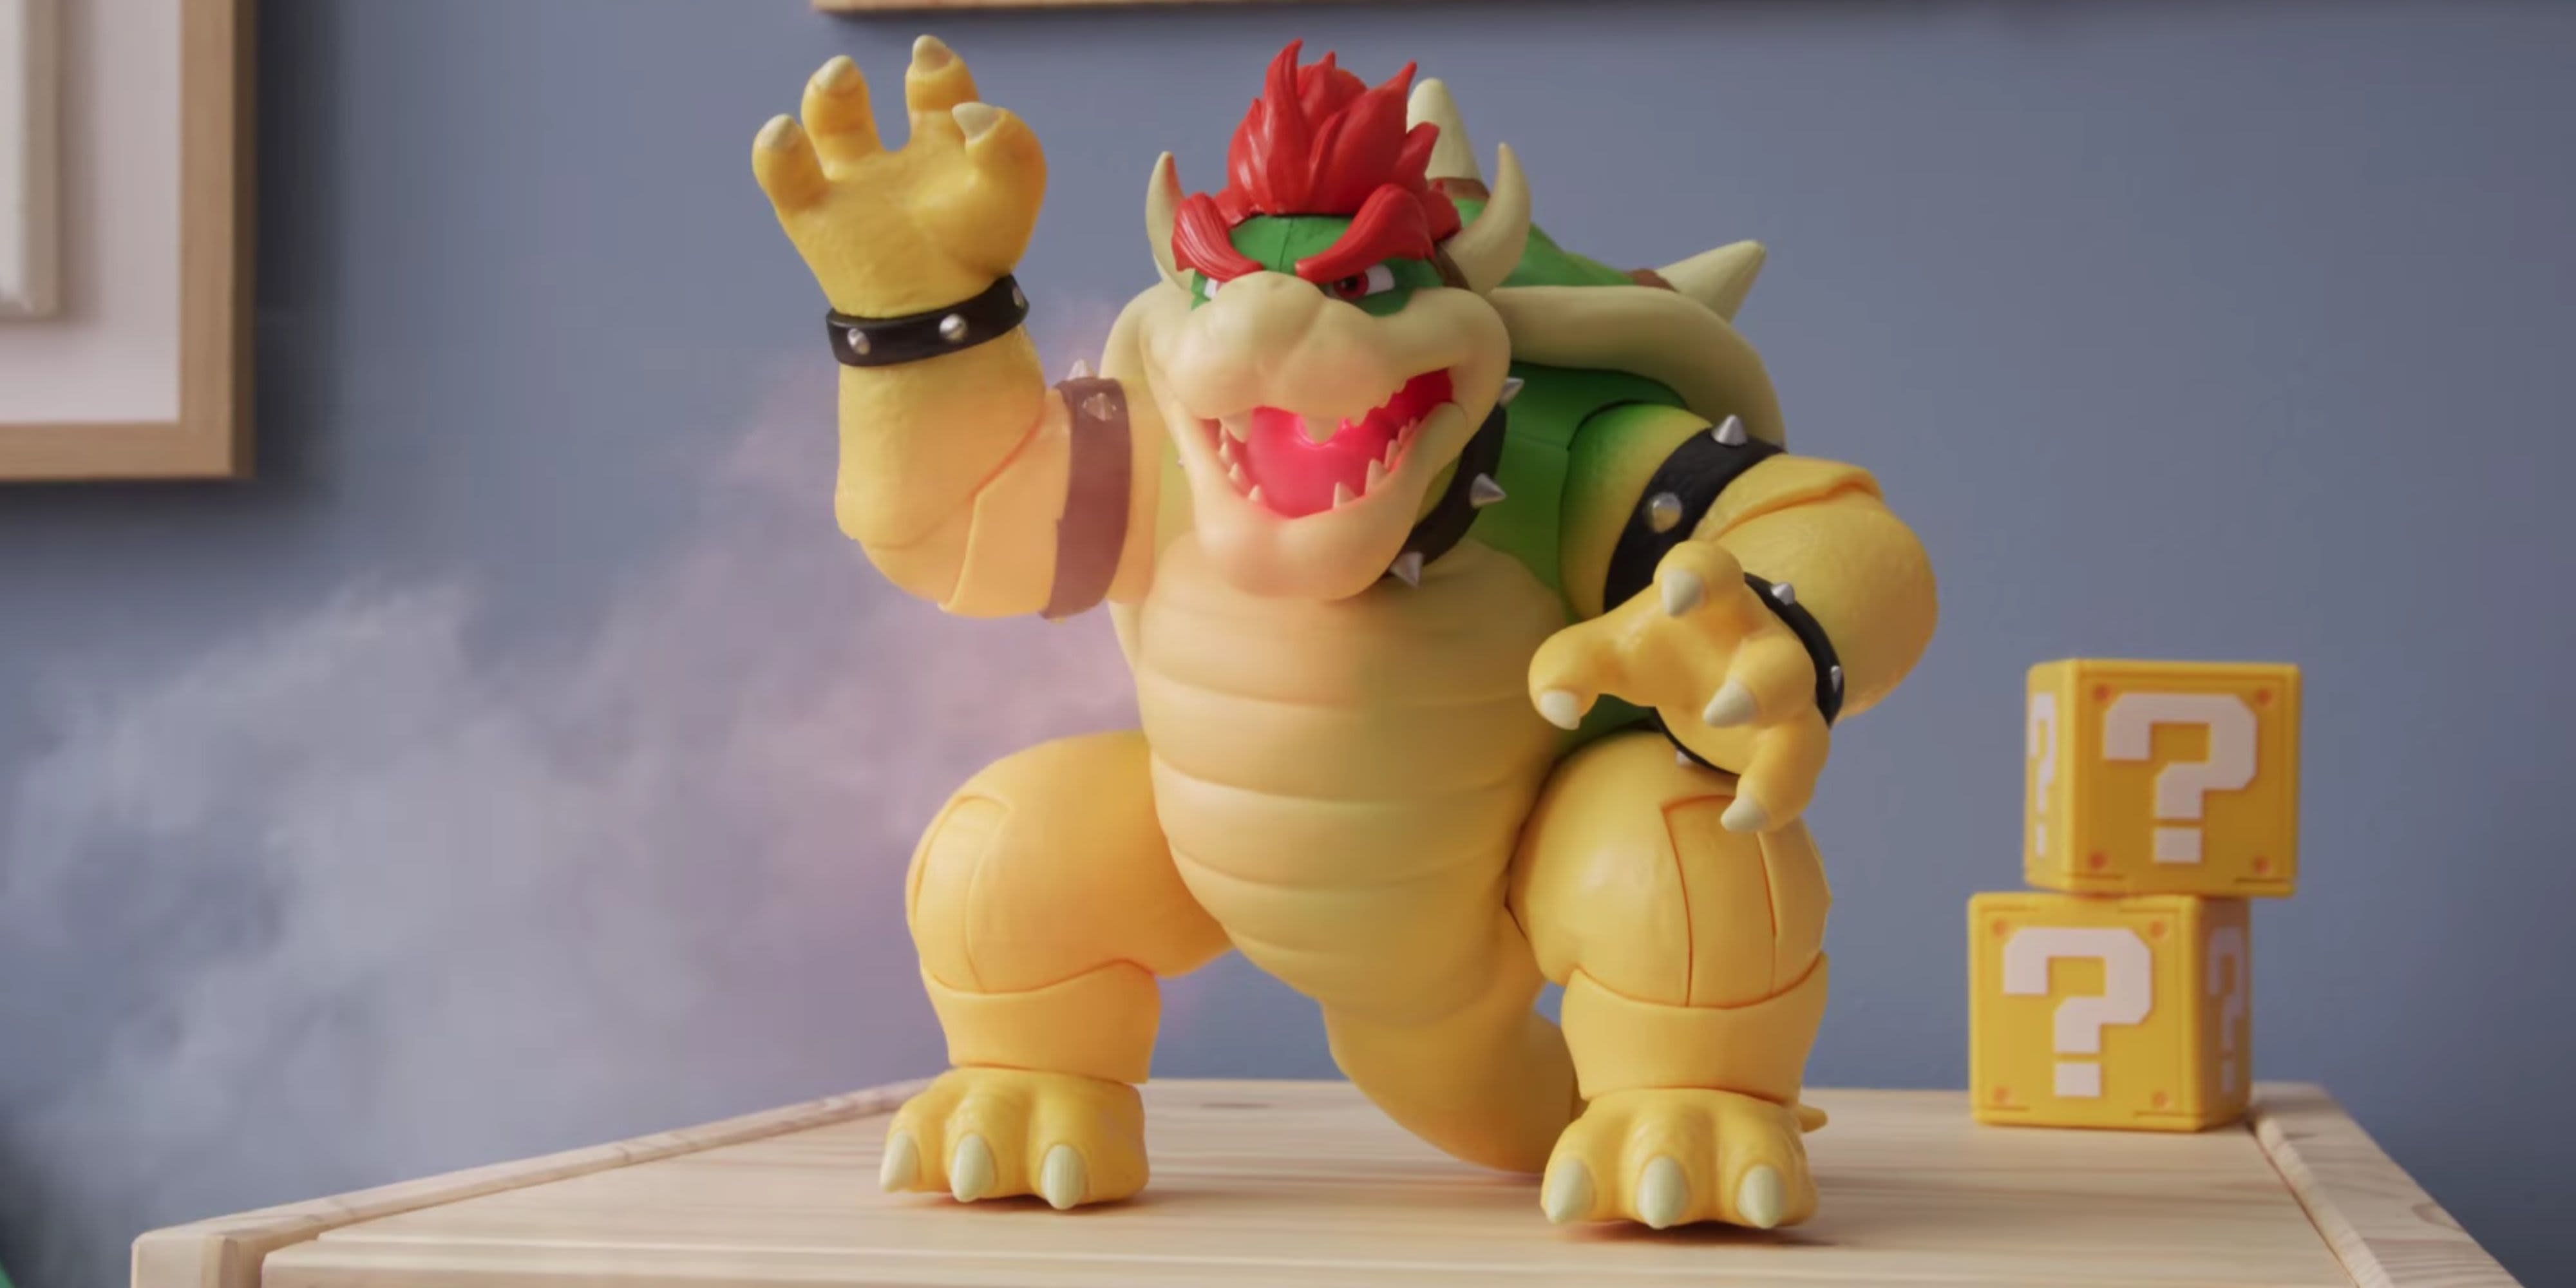 'Fire-Breathing' Mario Movie Bowser Is Almost Half Off At Amazon